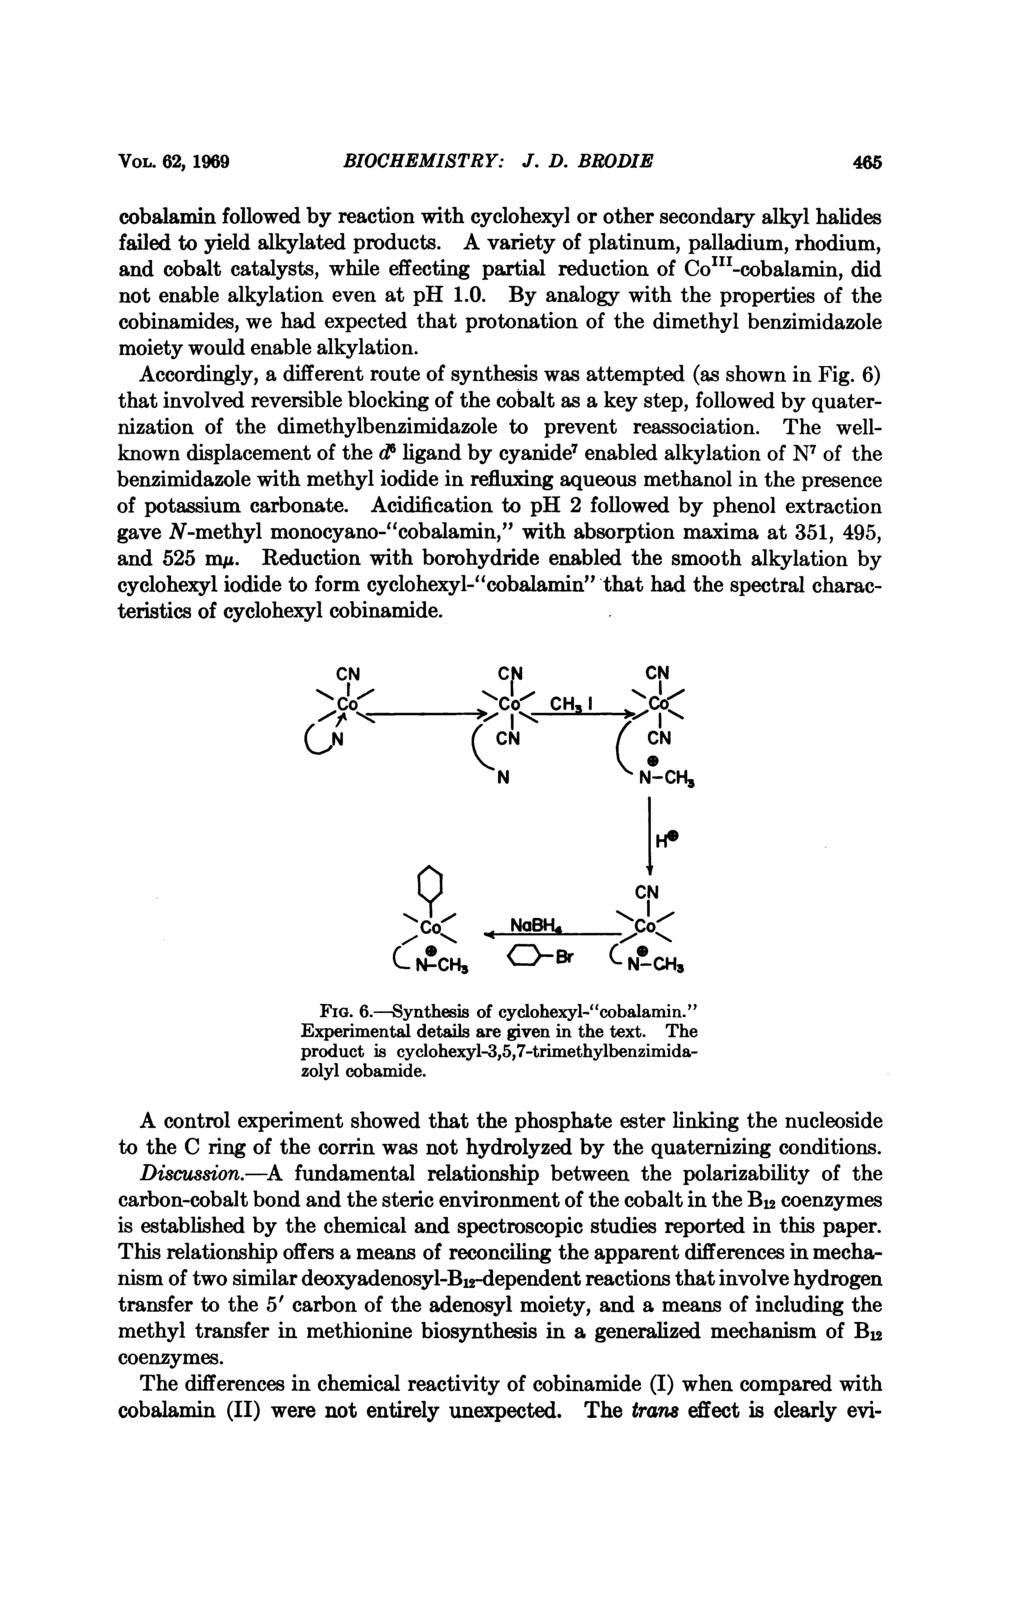 VOL. 62, 1969 BIOCHEMISTRY: J. D. BRODIE 465 cobalamin followed by reaction with cyclohexyl or other secondary alkyl halides failed to yield alkylated products.